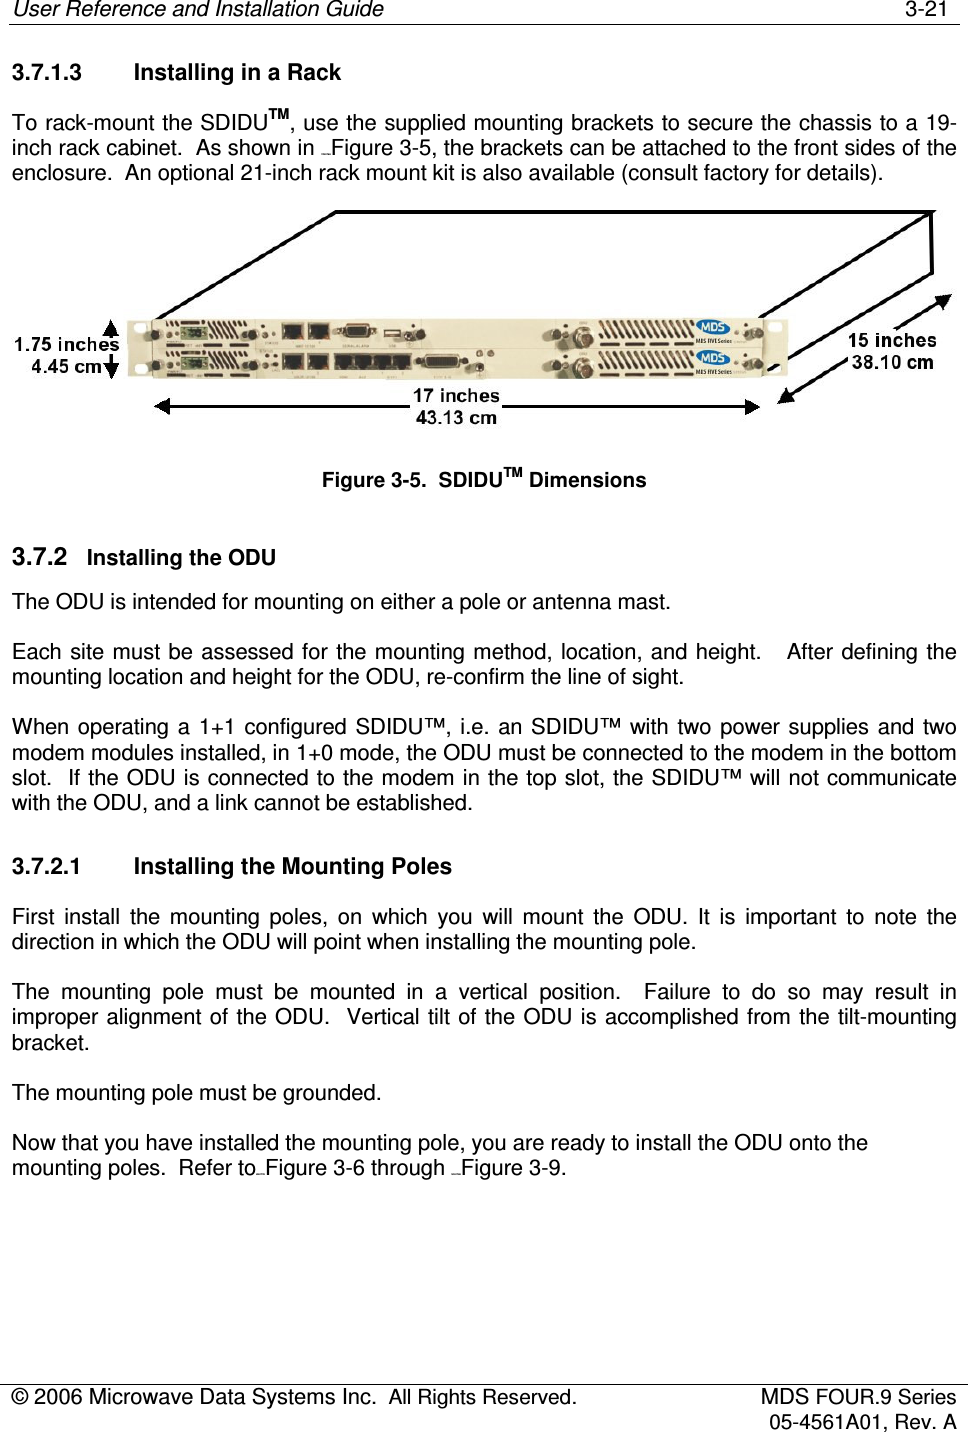 User Reference and Installation Guide    3-21 © 2006 Microwave Data Systems Inc.  All Rights Reserved.  MDS FOUR.9 Series 05-4561A01, Rev. A  3.7.1.3  Installing in a Rack To rack-mount the SDIDUTM, use the supplied mounting brackets to secure the chassis to a 19-inch rack cabinet.  As shown in 179H176HFigure 3-5, the brackets can be attached to the front sides of the enclosure.  An optional 21-inch rack mount kit is also available (consult factory for details).  Figure 3-5.  SDIDUTM Dimensions 3.7.2  Installing the ODU The ODU is intended for mounting on either a pole or antenna mast.  Each site must be  assessed for  the mounting method, location, and height.   After defining the mounting location and height for the ODU, re-confirm the line of sight. When operating a  1+1 configured  SDIDU™, i.e. an SDIDU™ with two  power supplies and two modem modules installed, in 1+0 mode, the ODU must be connected to the modem in the bottom slot.  If the ODU is connected to the modem in the top slot, the SDIDU™ will not communicate with the ODU, and a link cannot be established. 3.7.2.1  Installing the Mounting Poles First  install  the  mounting  poles,  on  which  you  will  mount  the  ODU.  It  is  important  to  note  the direction in which the ODU will point when installing the mounting pole. The  mounting  pole  must  be  mounted  in  a  vertical  position.    Failure  to  do  so  may  result  in improper alignment of the ODU.  Vertical tilt of the ODU is accomplished from the tilt-mounting bracket. The mounting pole must be grounded.  Now that you have installed the mounting pole, you are ready to install the ODU onto the mounting poles.  Refer to80H177HFigure 3-6 through 181H178HFigure 3-9. 